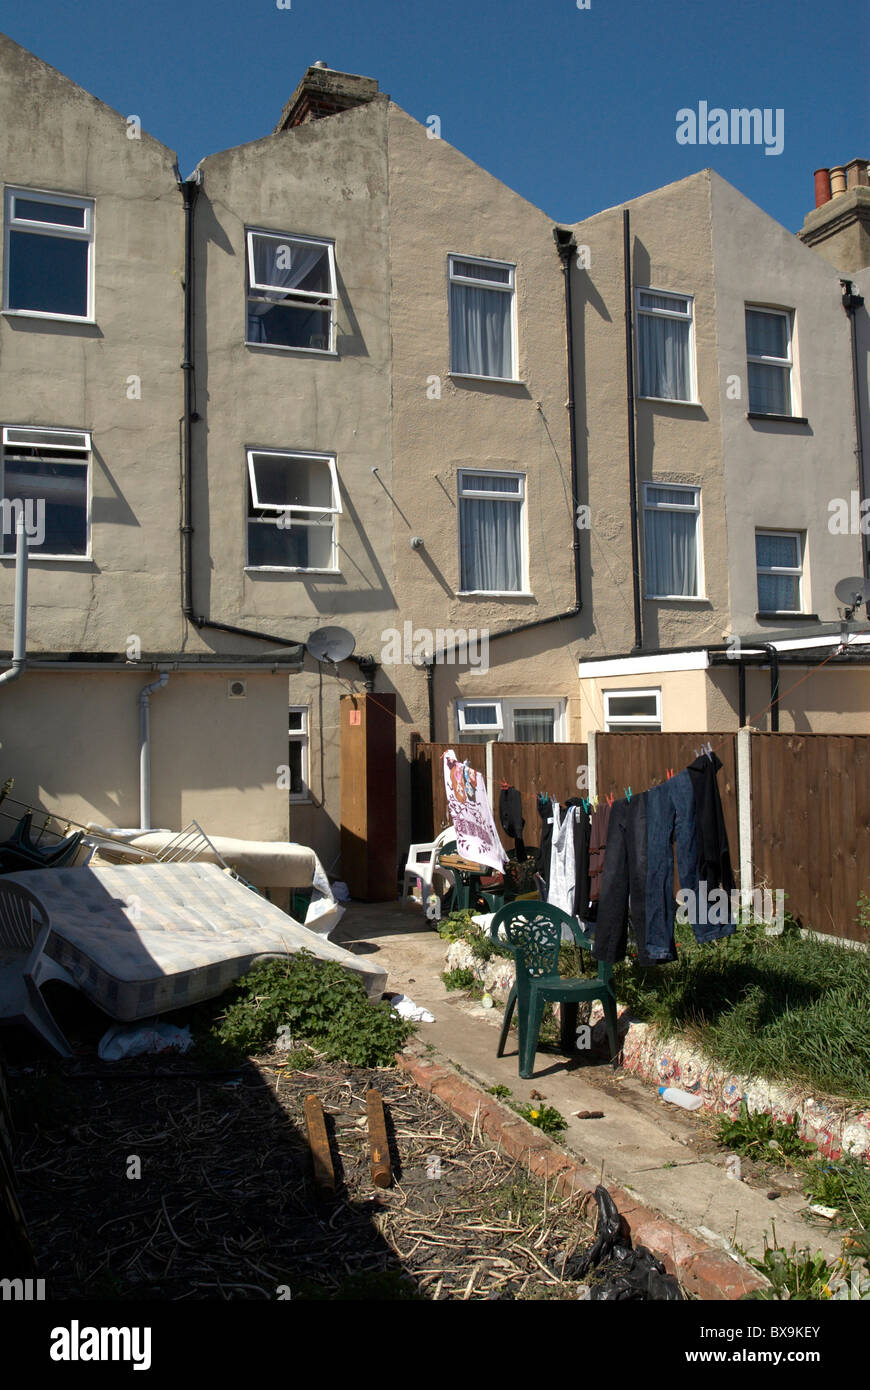 Back yards of terrace houses Harwich Essex UK Stock Photo